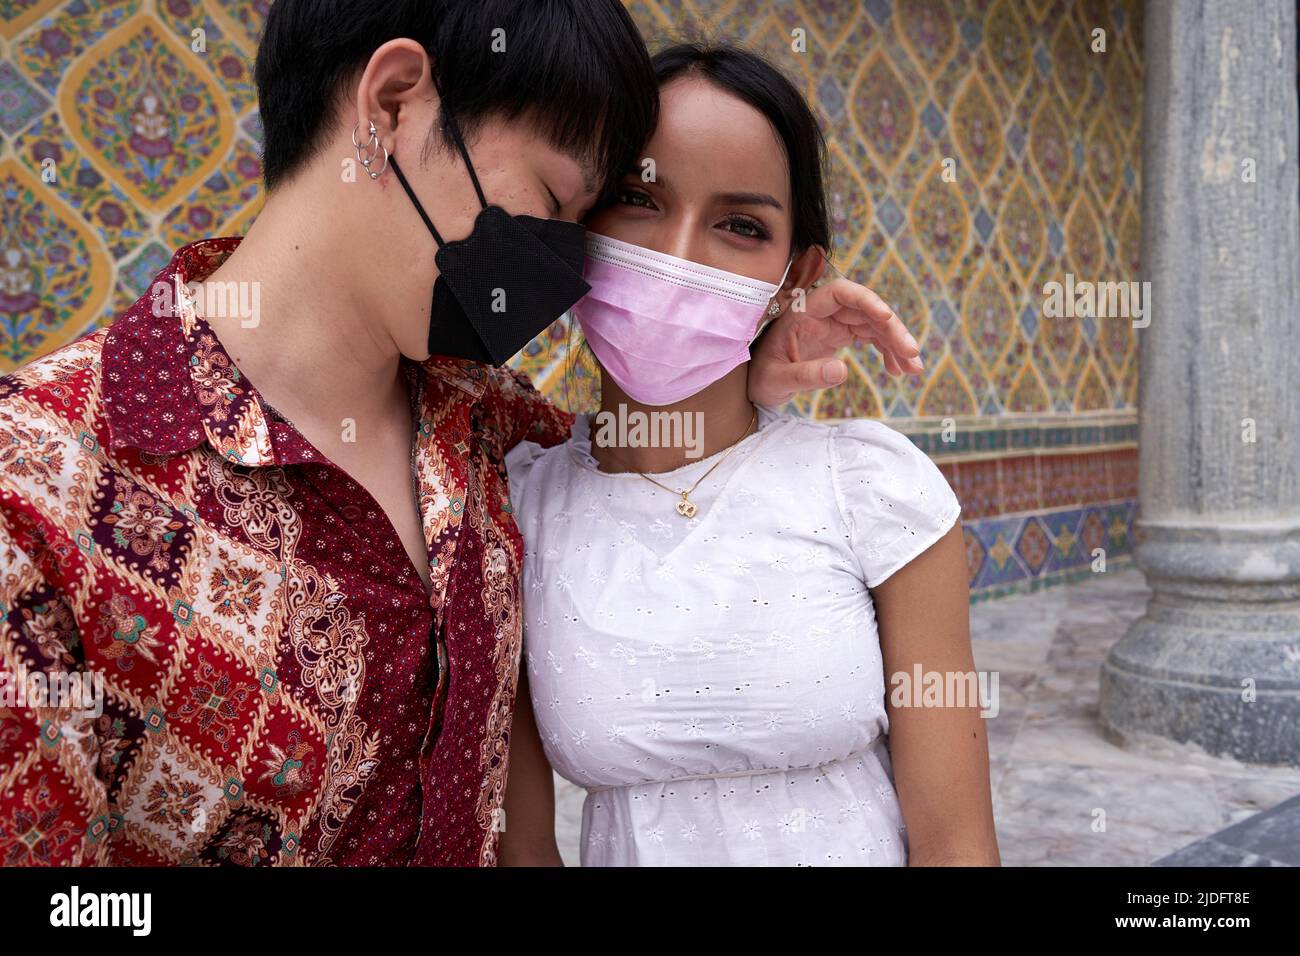 Multicultural and transgender couple embracing tenderly outside a buddhist temple Stock Photo